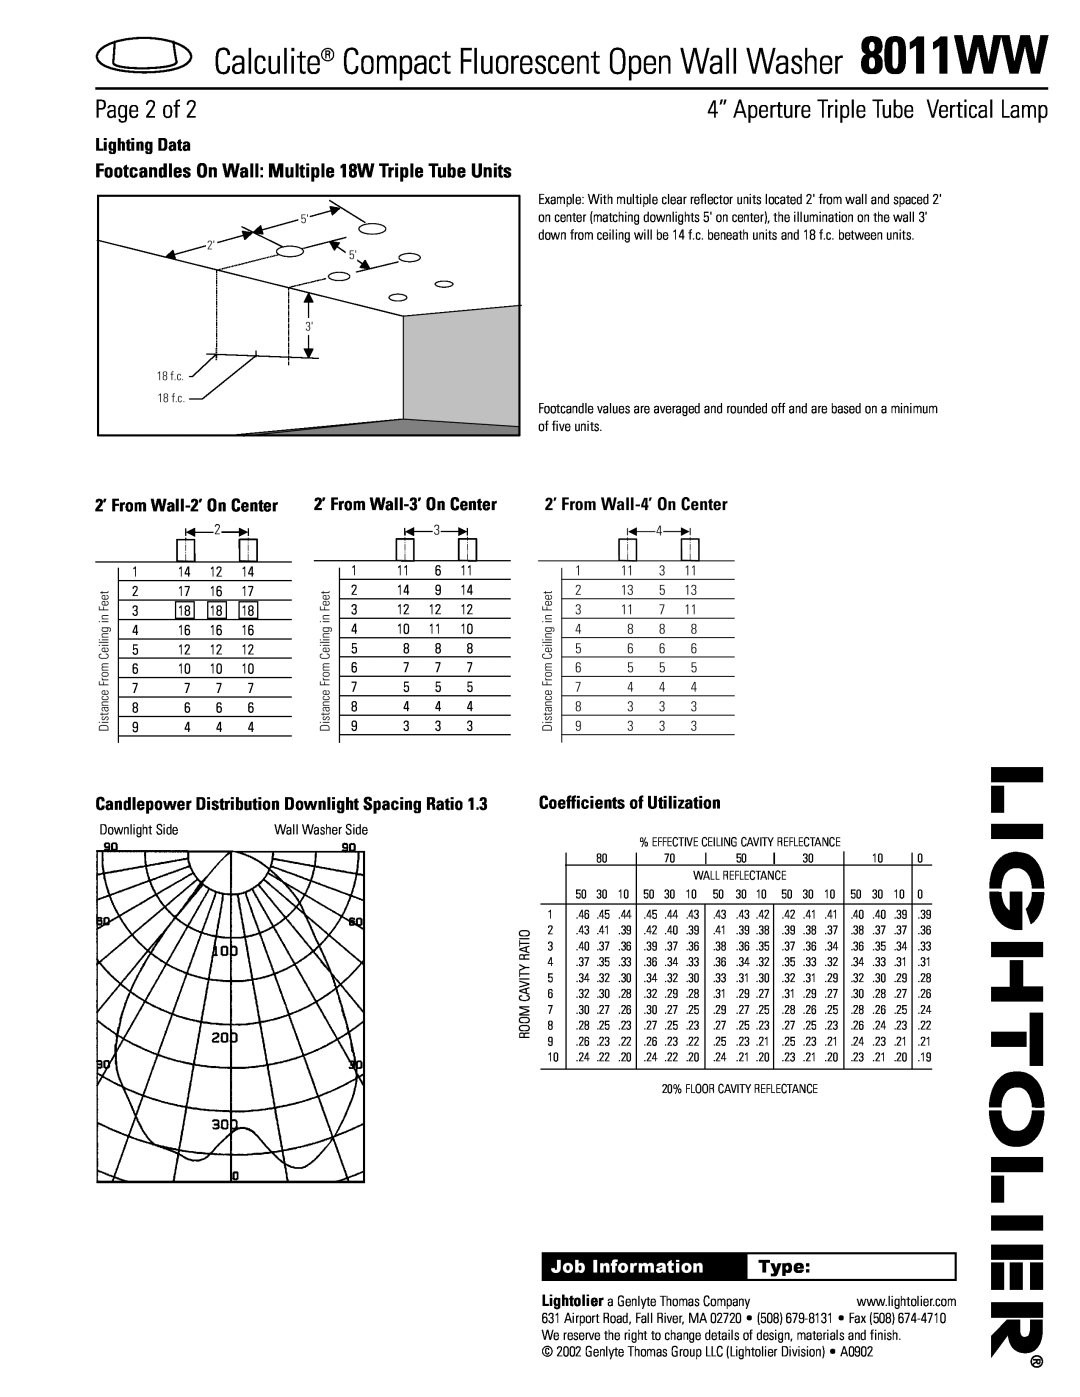 Lightolier 8011WW specifications 4” Aperture Triple Tube Vertical Lamp, Page 2 of, Lighting Data, Job Information, Type 